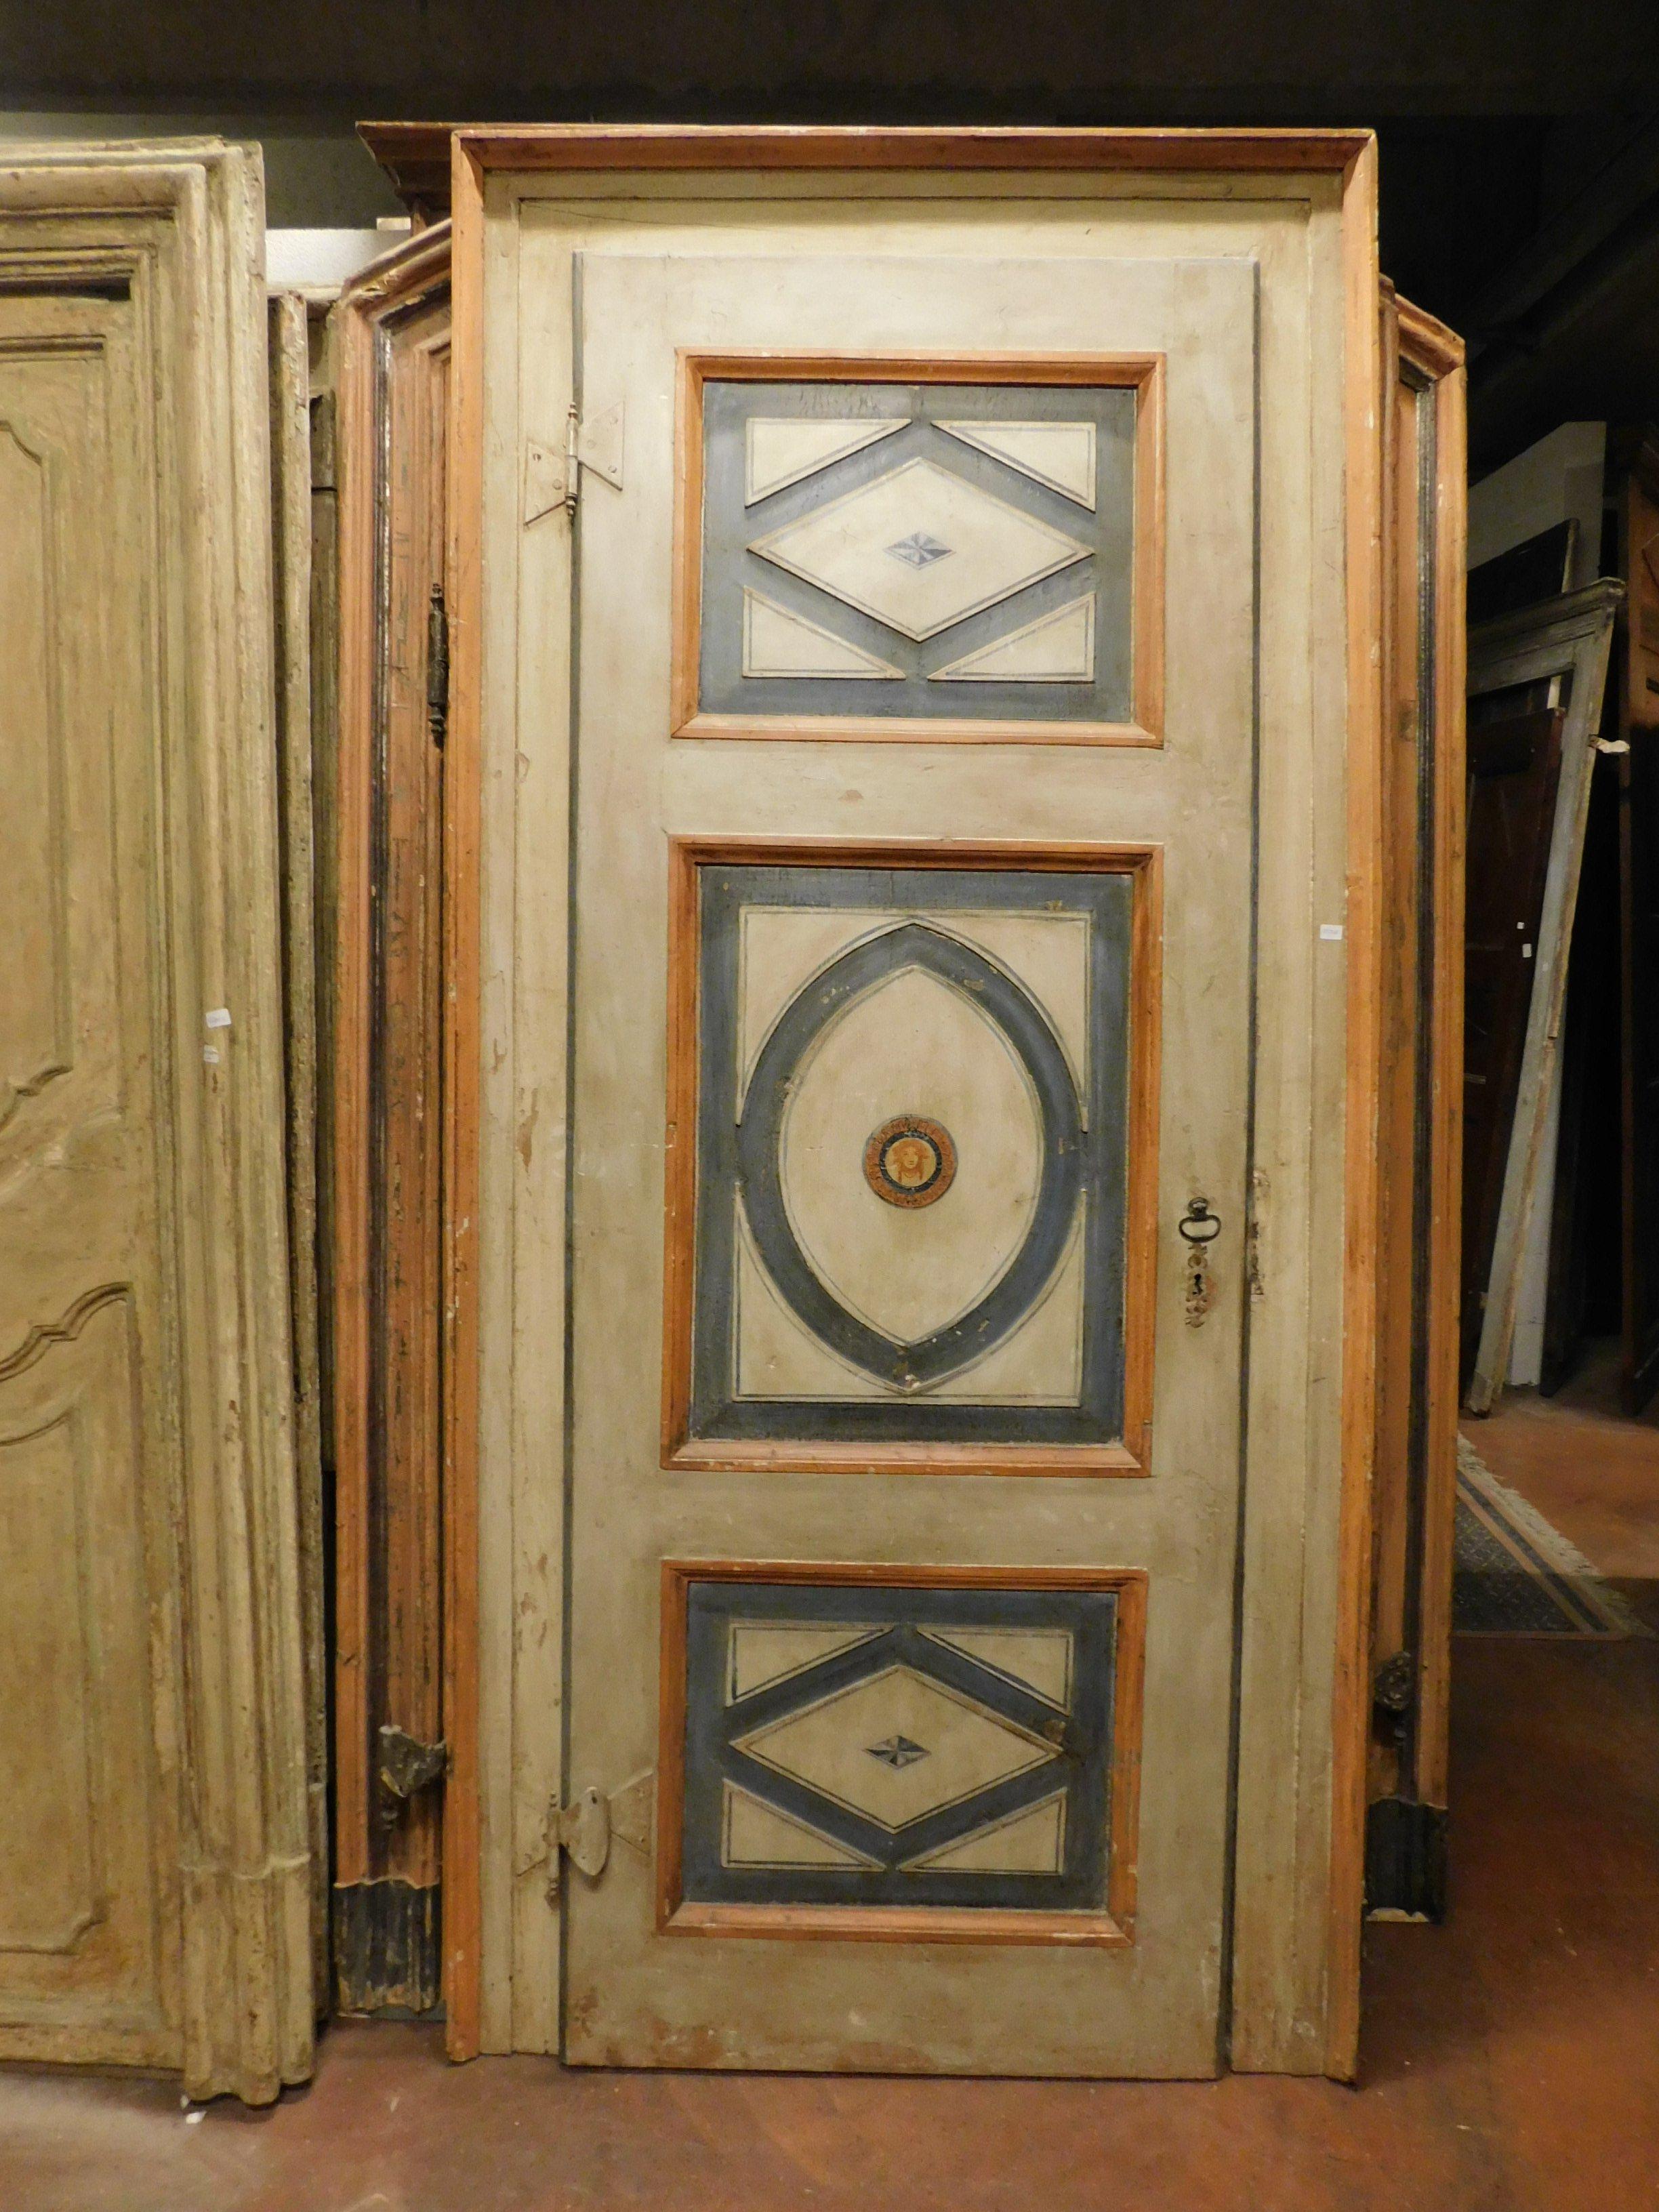 Antique door painted with frame, various colors: orange, green and beige, hand painted lozenge-shaped panels with central Venus, also painted on the back, with original frame and irons / handles, all handmade by artisans in Italy in the 1700, from